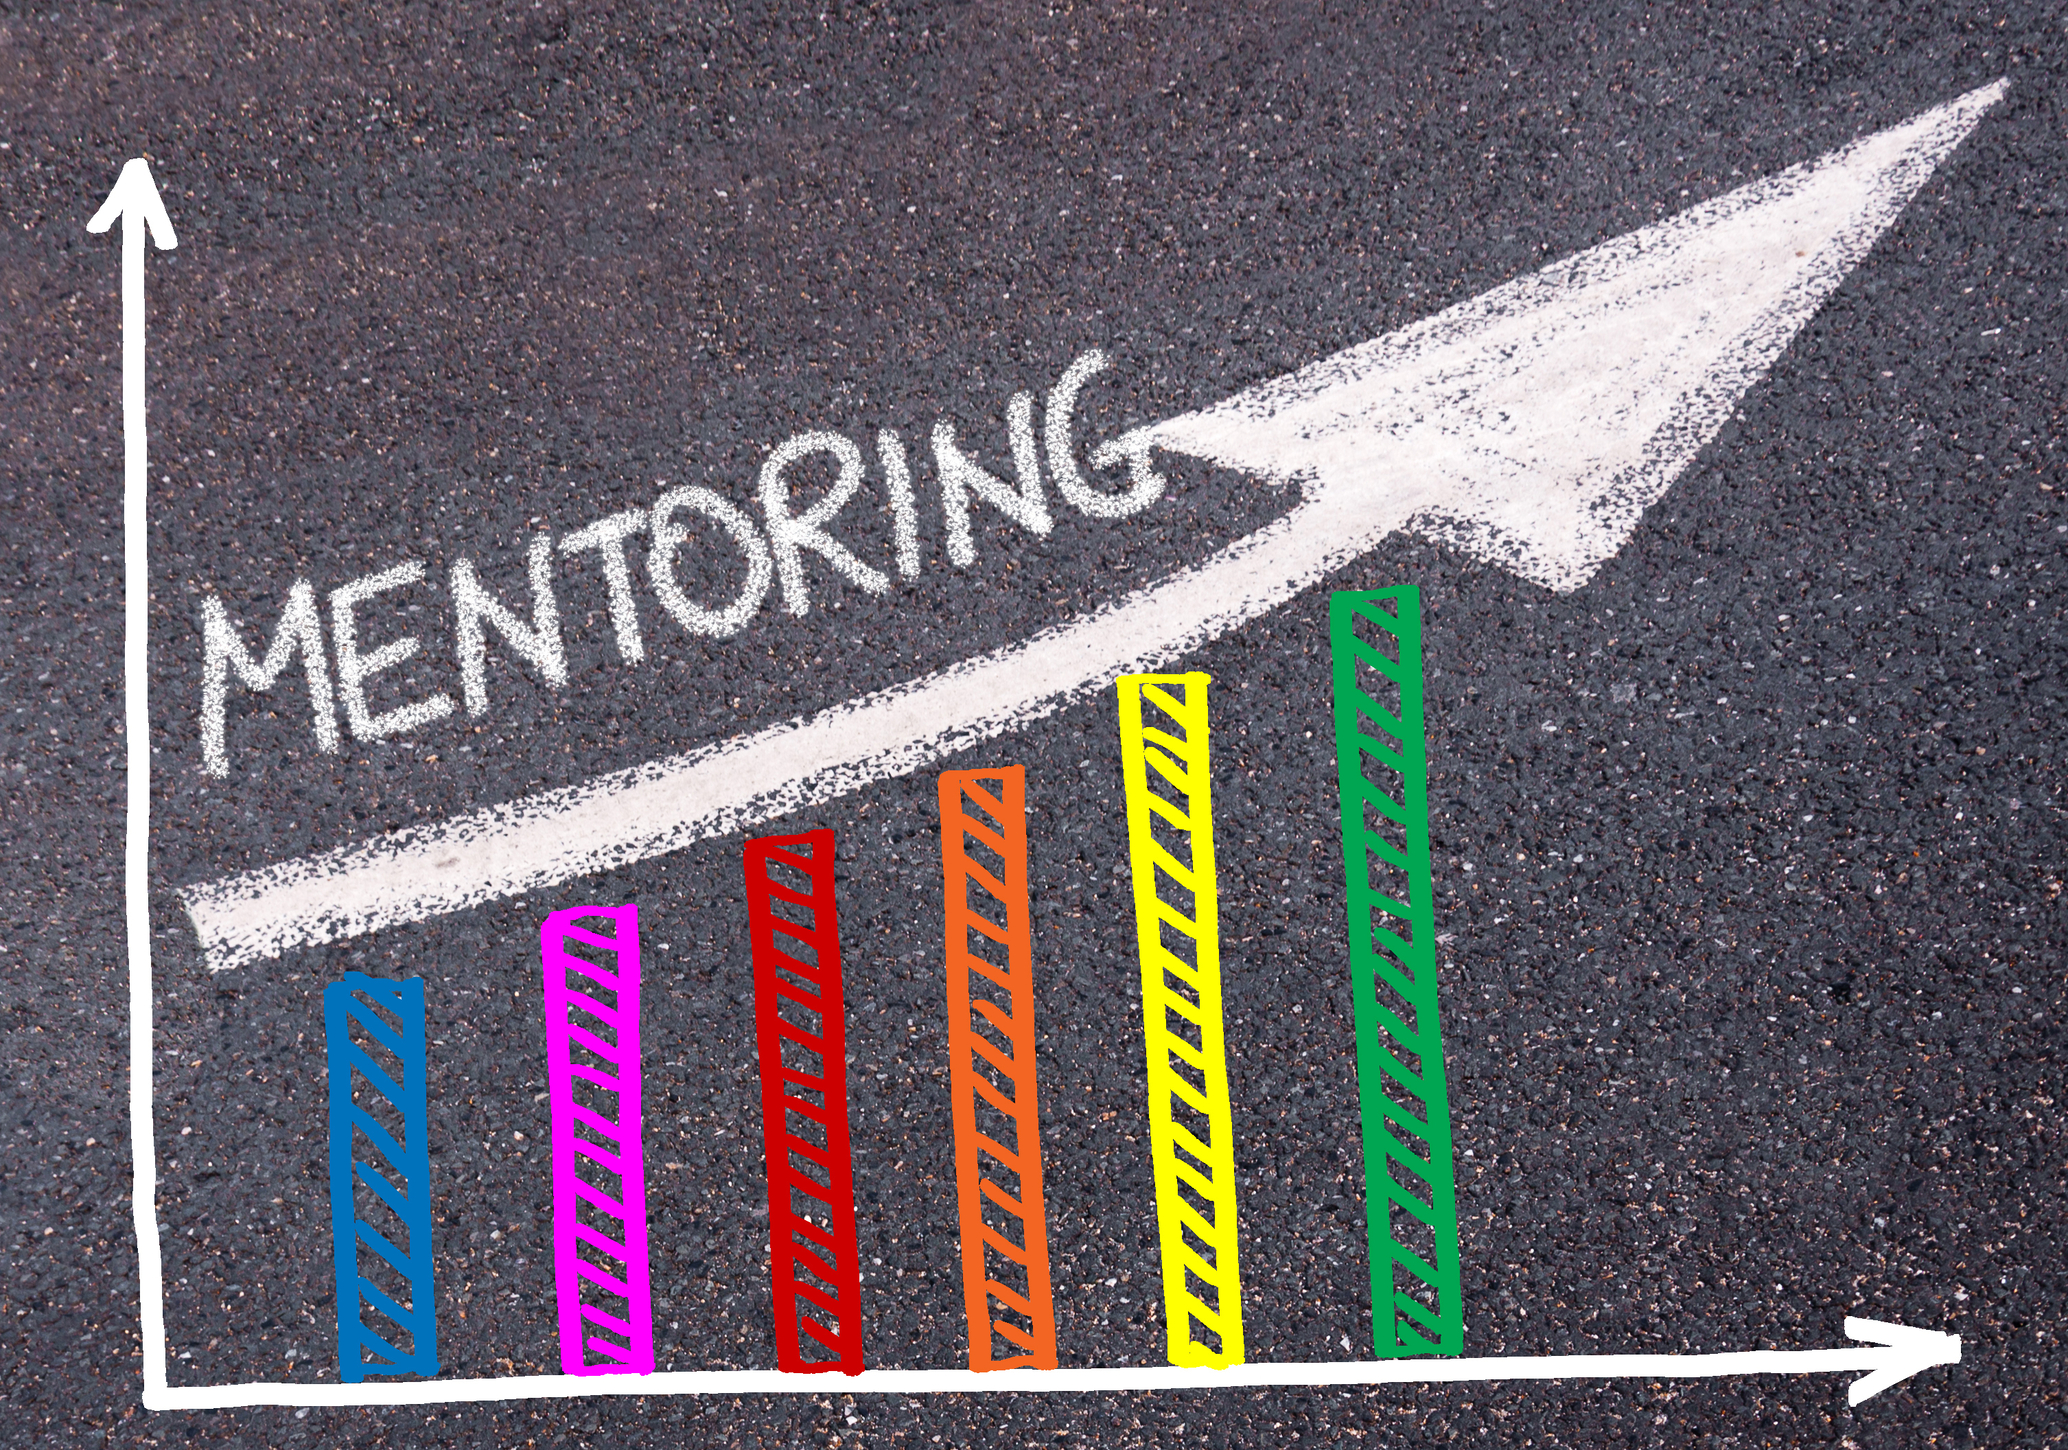 SQL Server Mentoring – Do you need a little help?